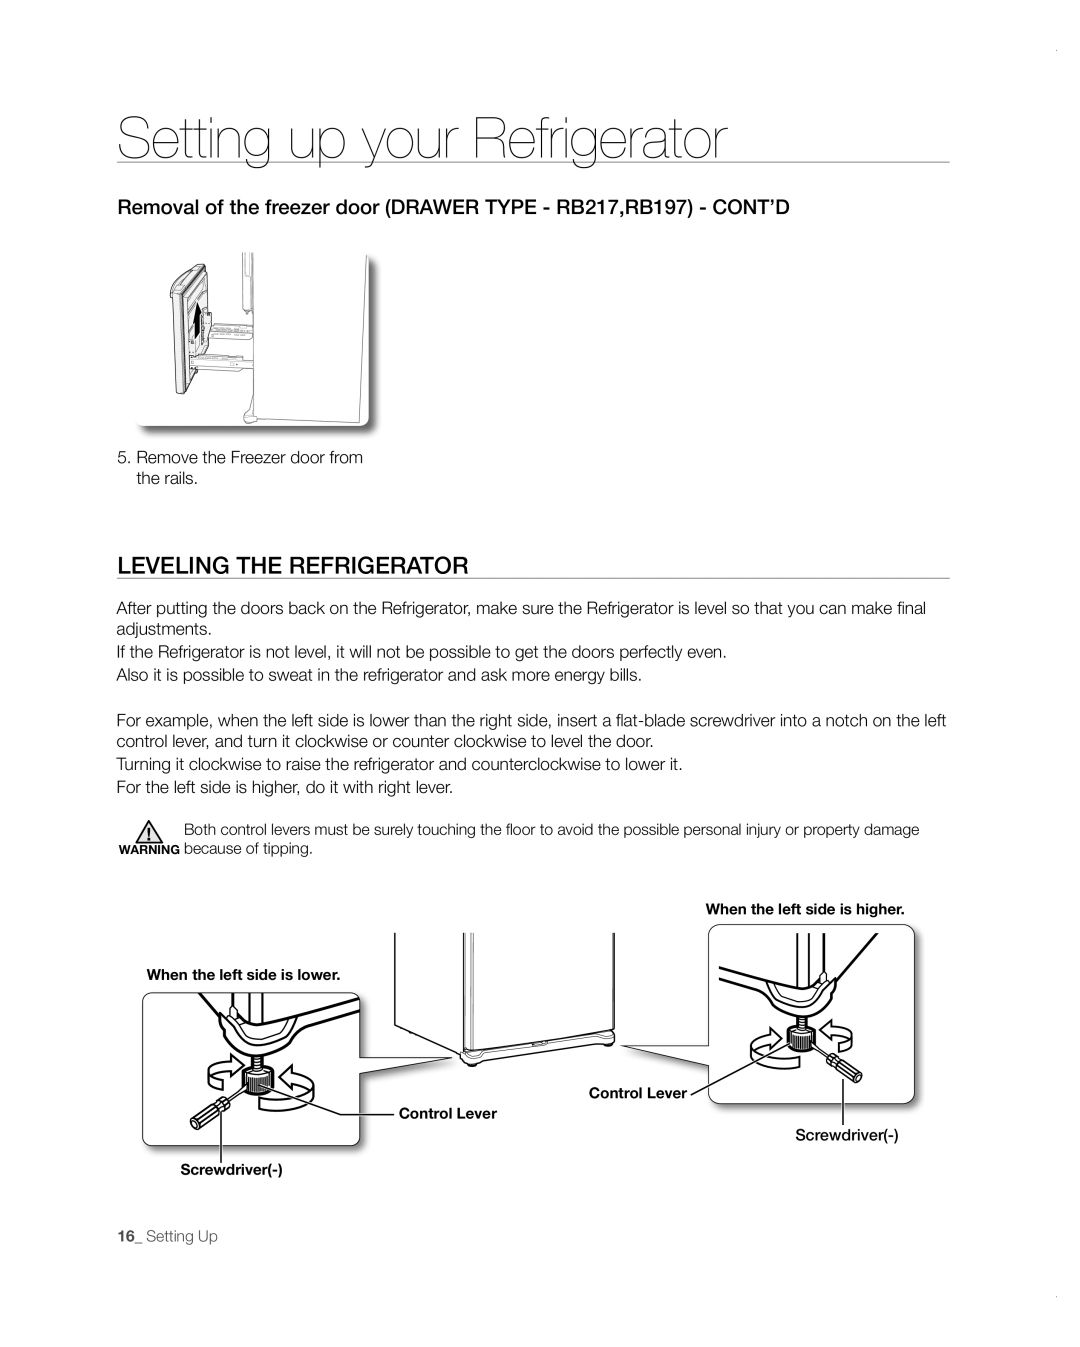 Samsung RB197ABBP user manual leveling the refrigerator, Removal of the freezer door DRAWER TYPE - RB217,RB197 - CONT’D 